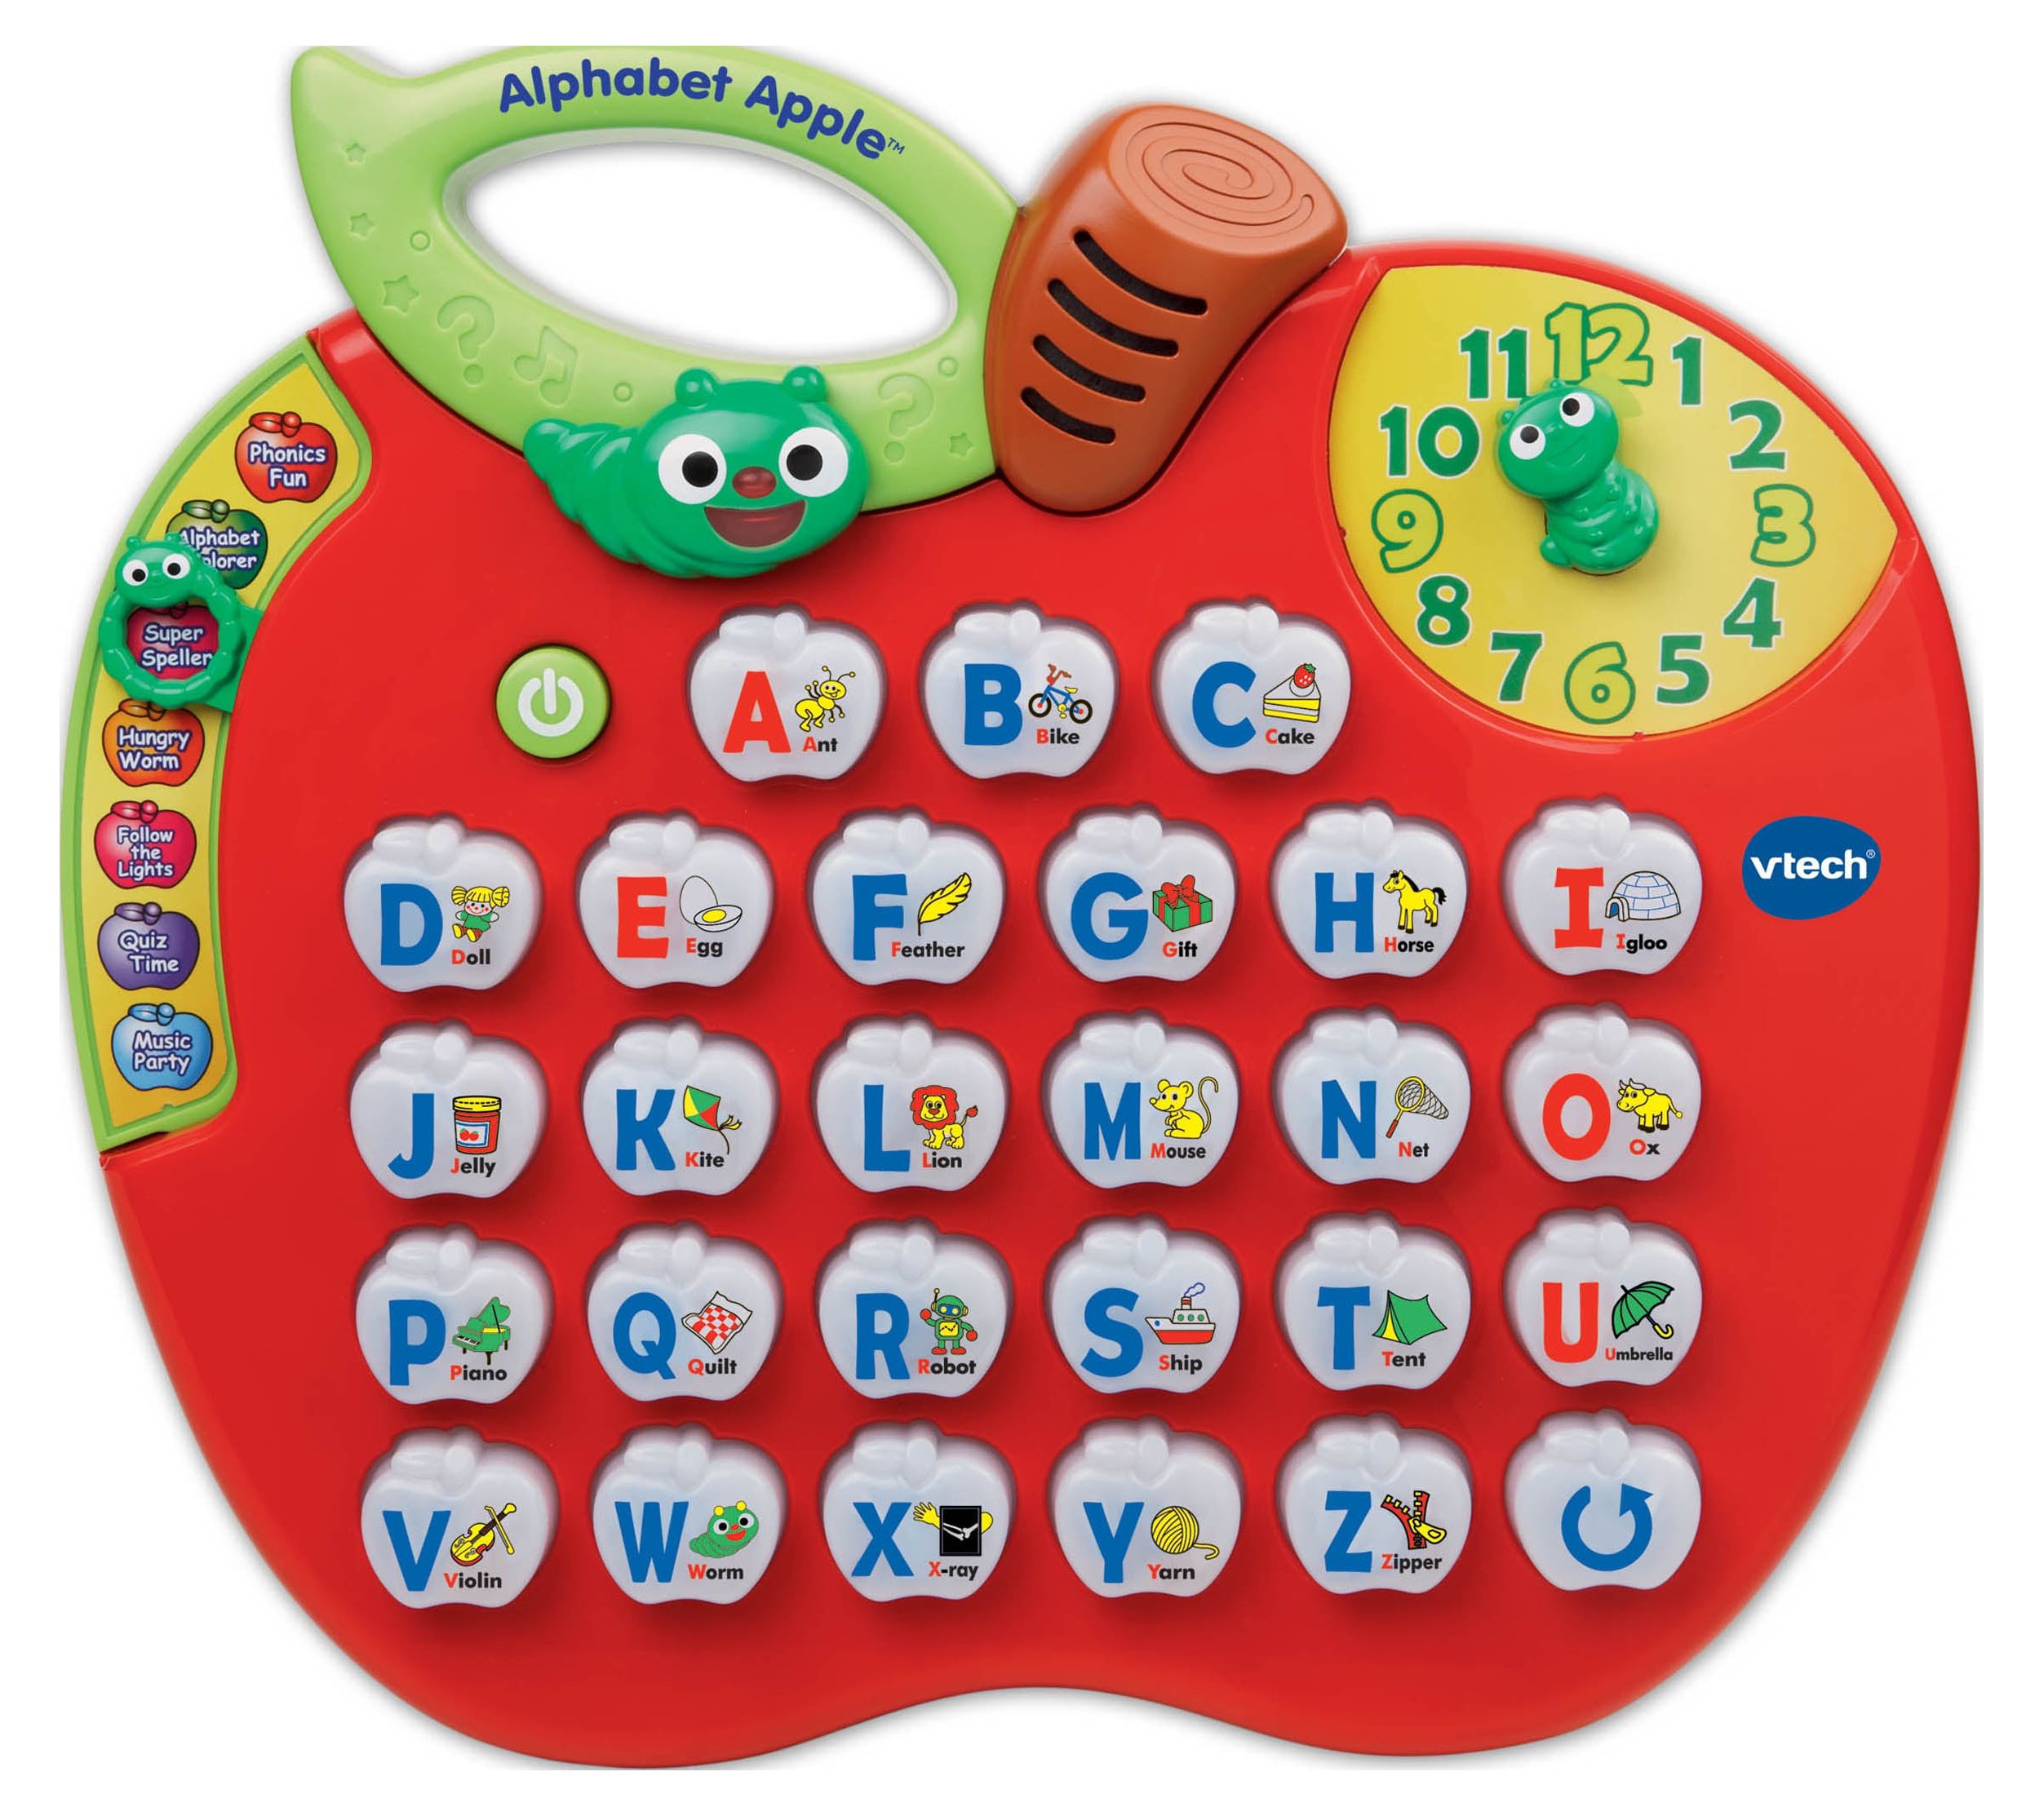 VTech, Alphabet Apple, ABC Learning Toy, Preschool Toy - image 1 of 5